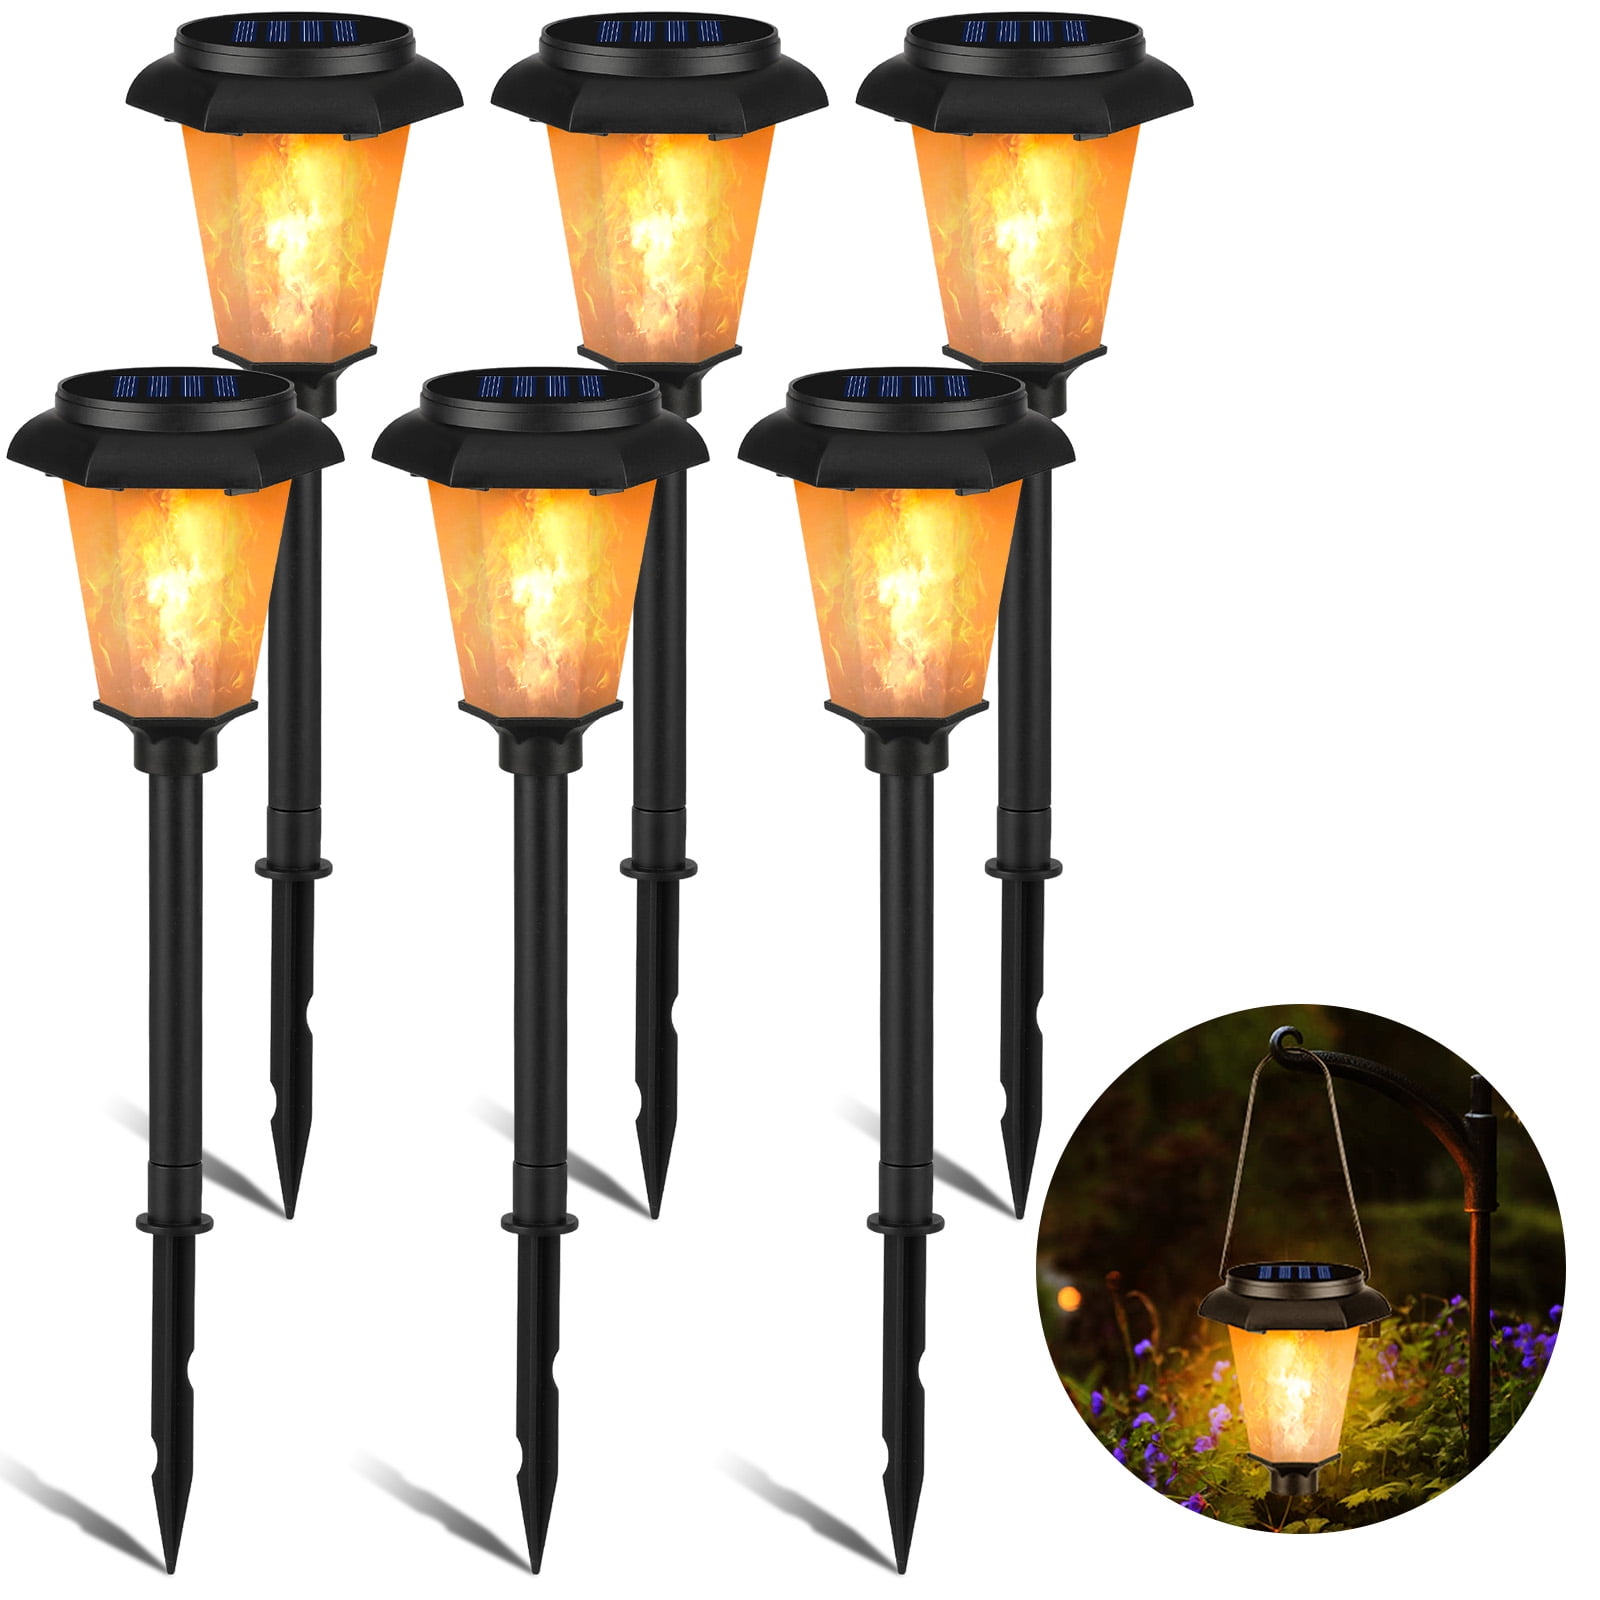 Flickering LED Solar Flame Torch Light Outdoor Garden Yard Lawn Pathway Lamp C 